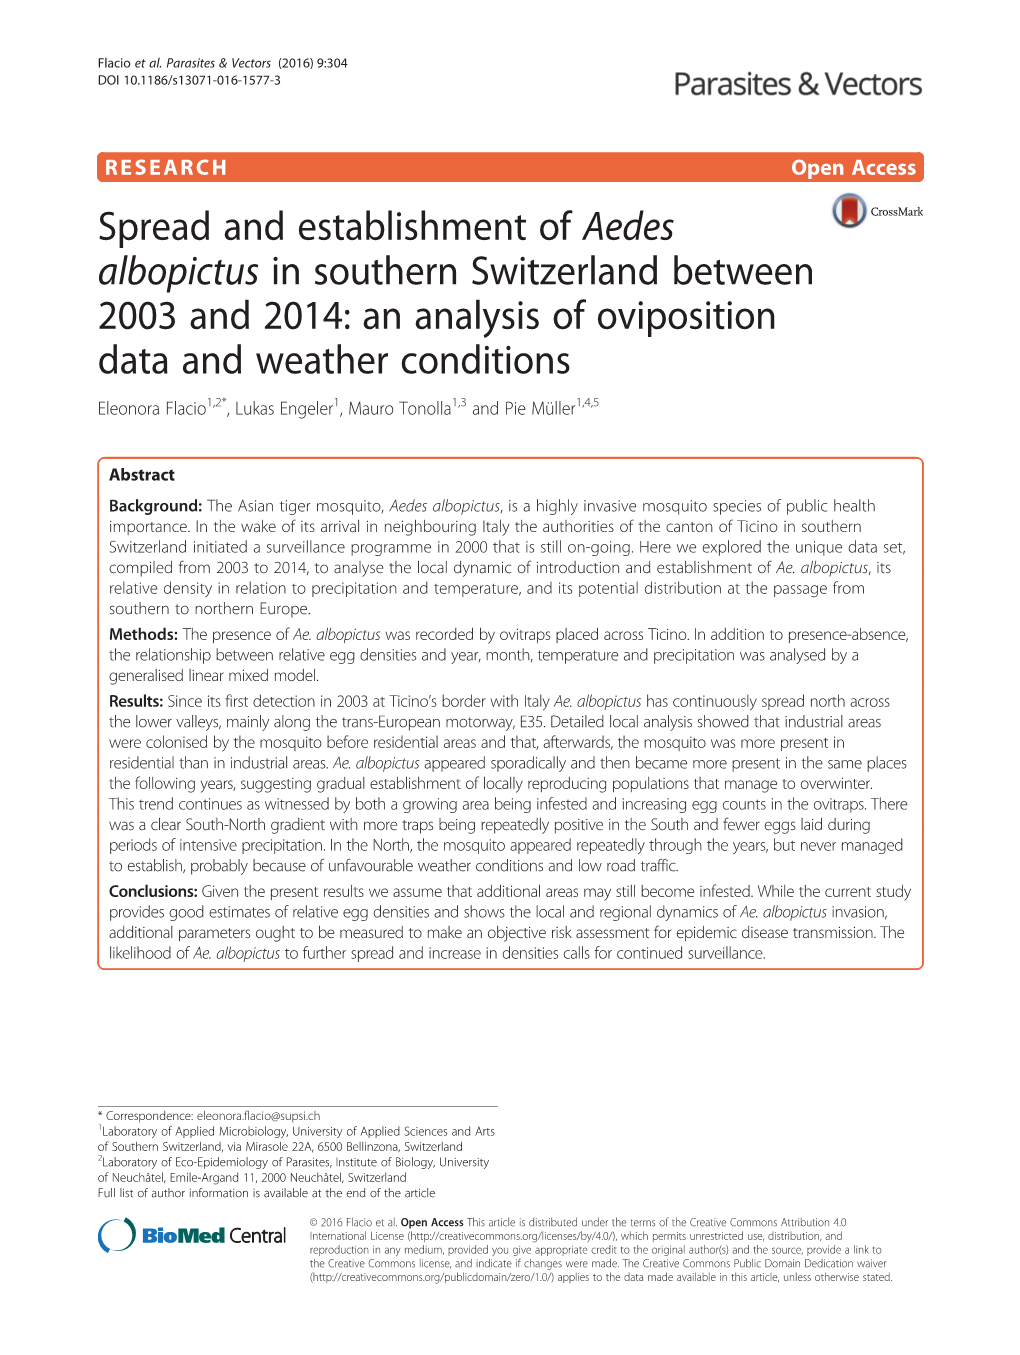 Spread and Establishment of Aedes Albopictus in Southern Switzerland